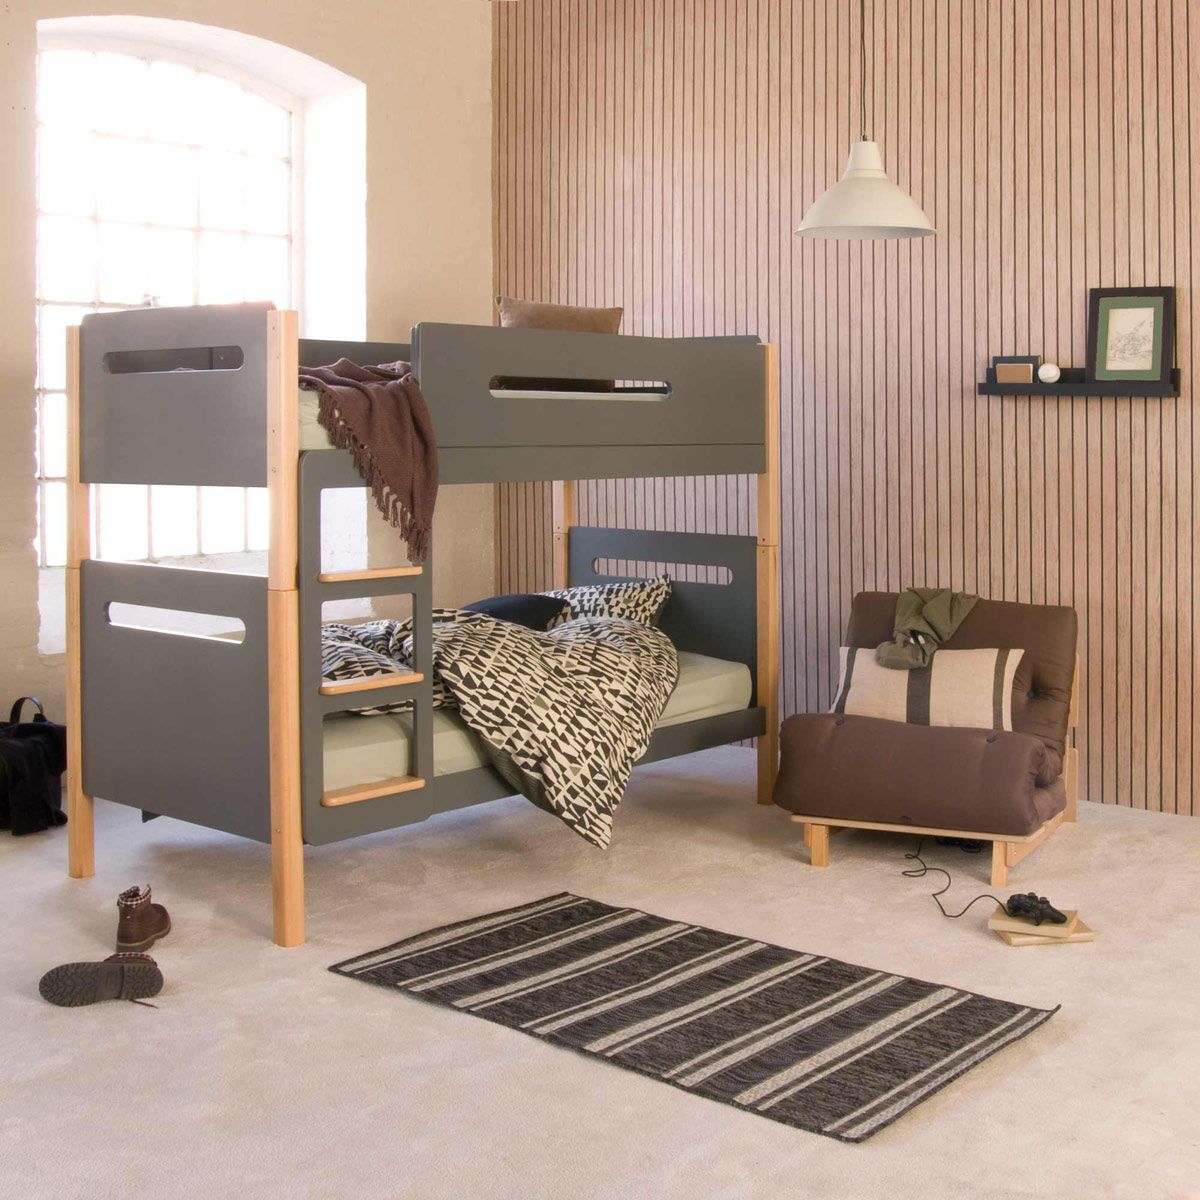 bunk beds with brown futon chair